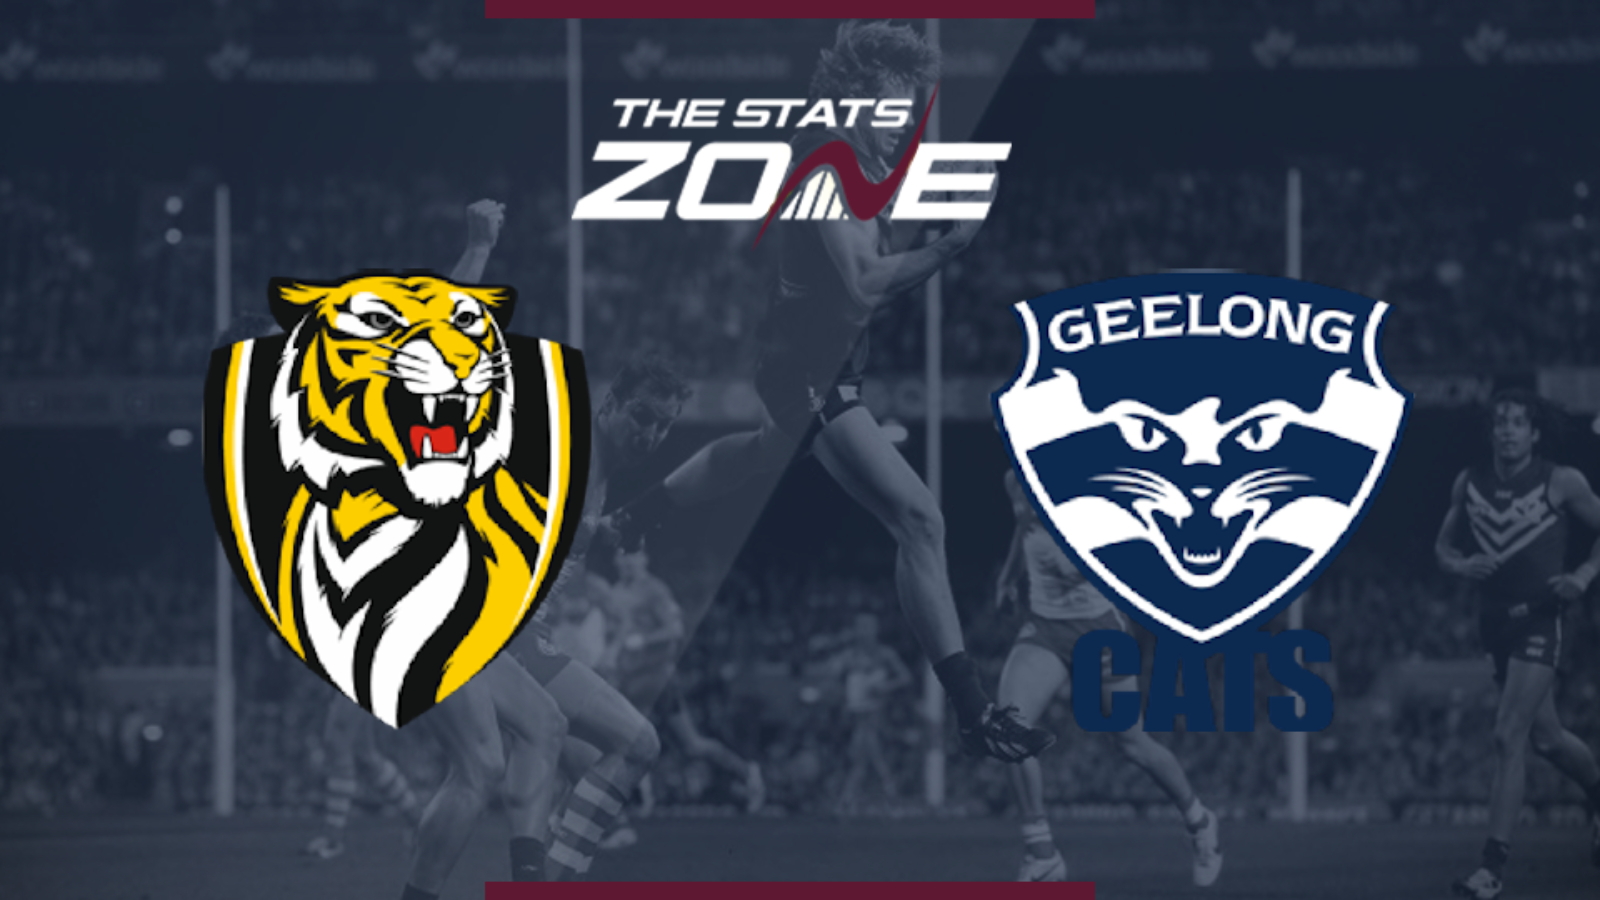 2019 Afl Richmond Tigers Vs Geelong Cats Preview Prediction The Stats Zone